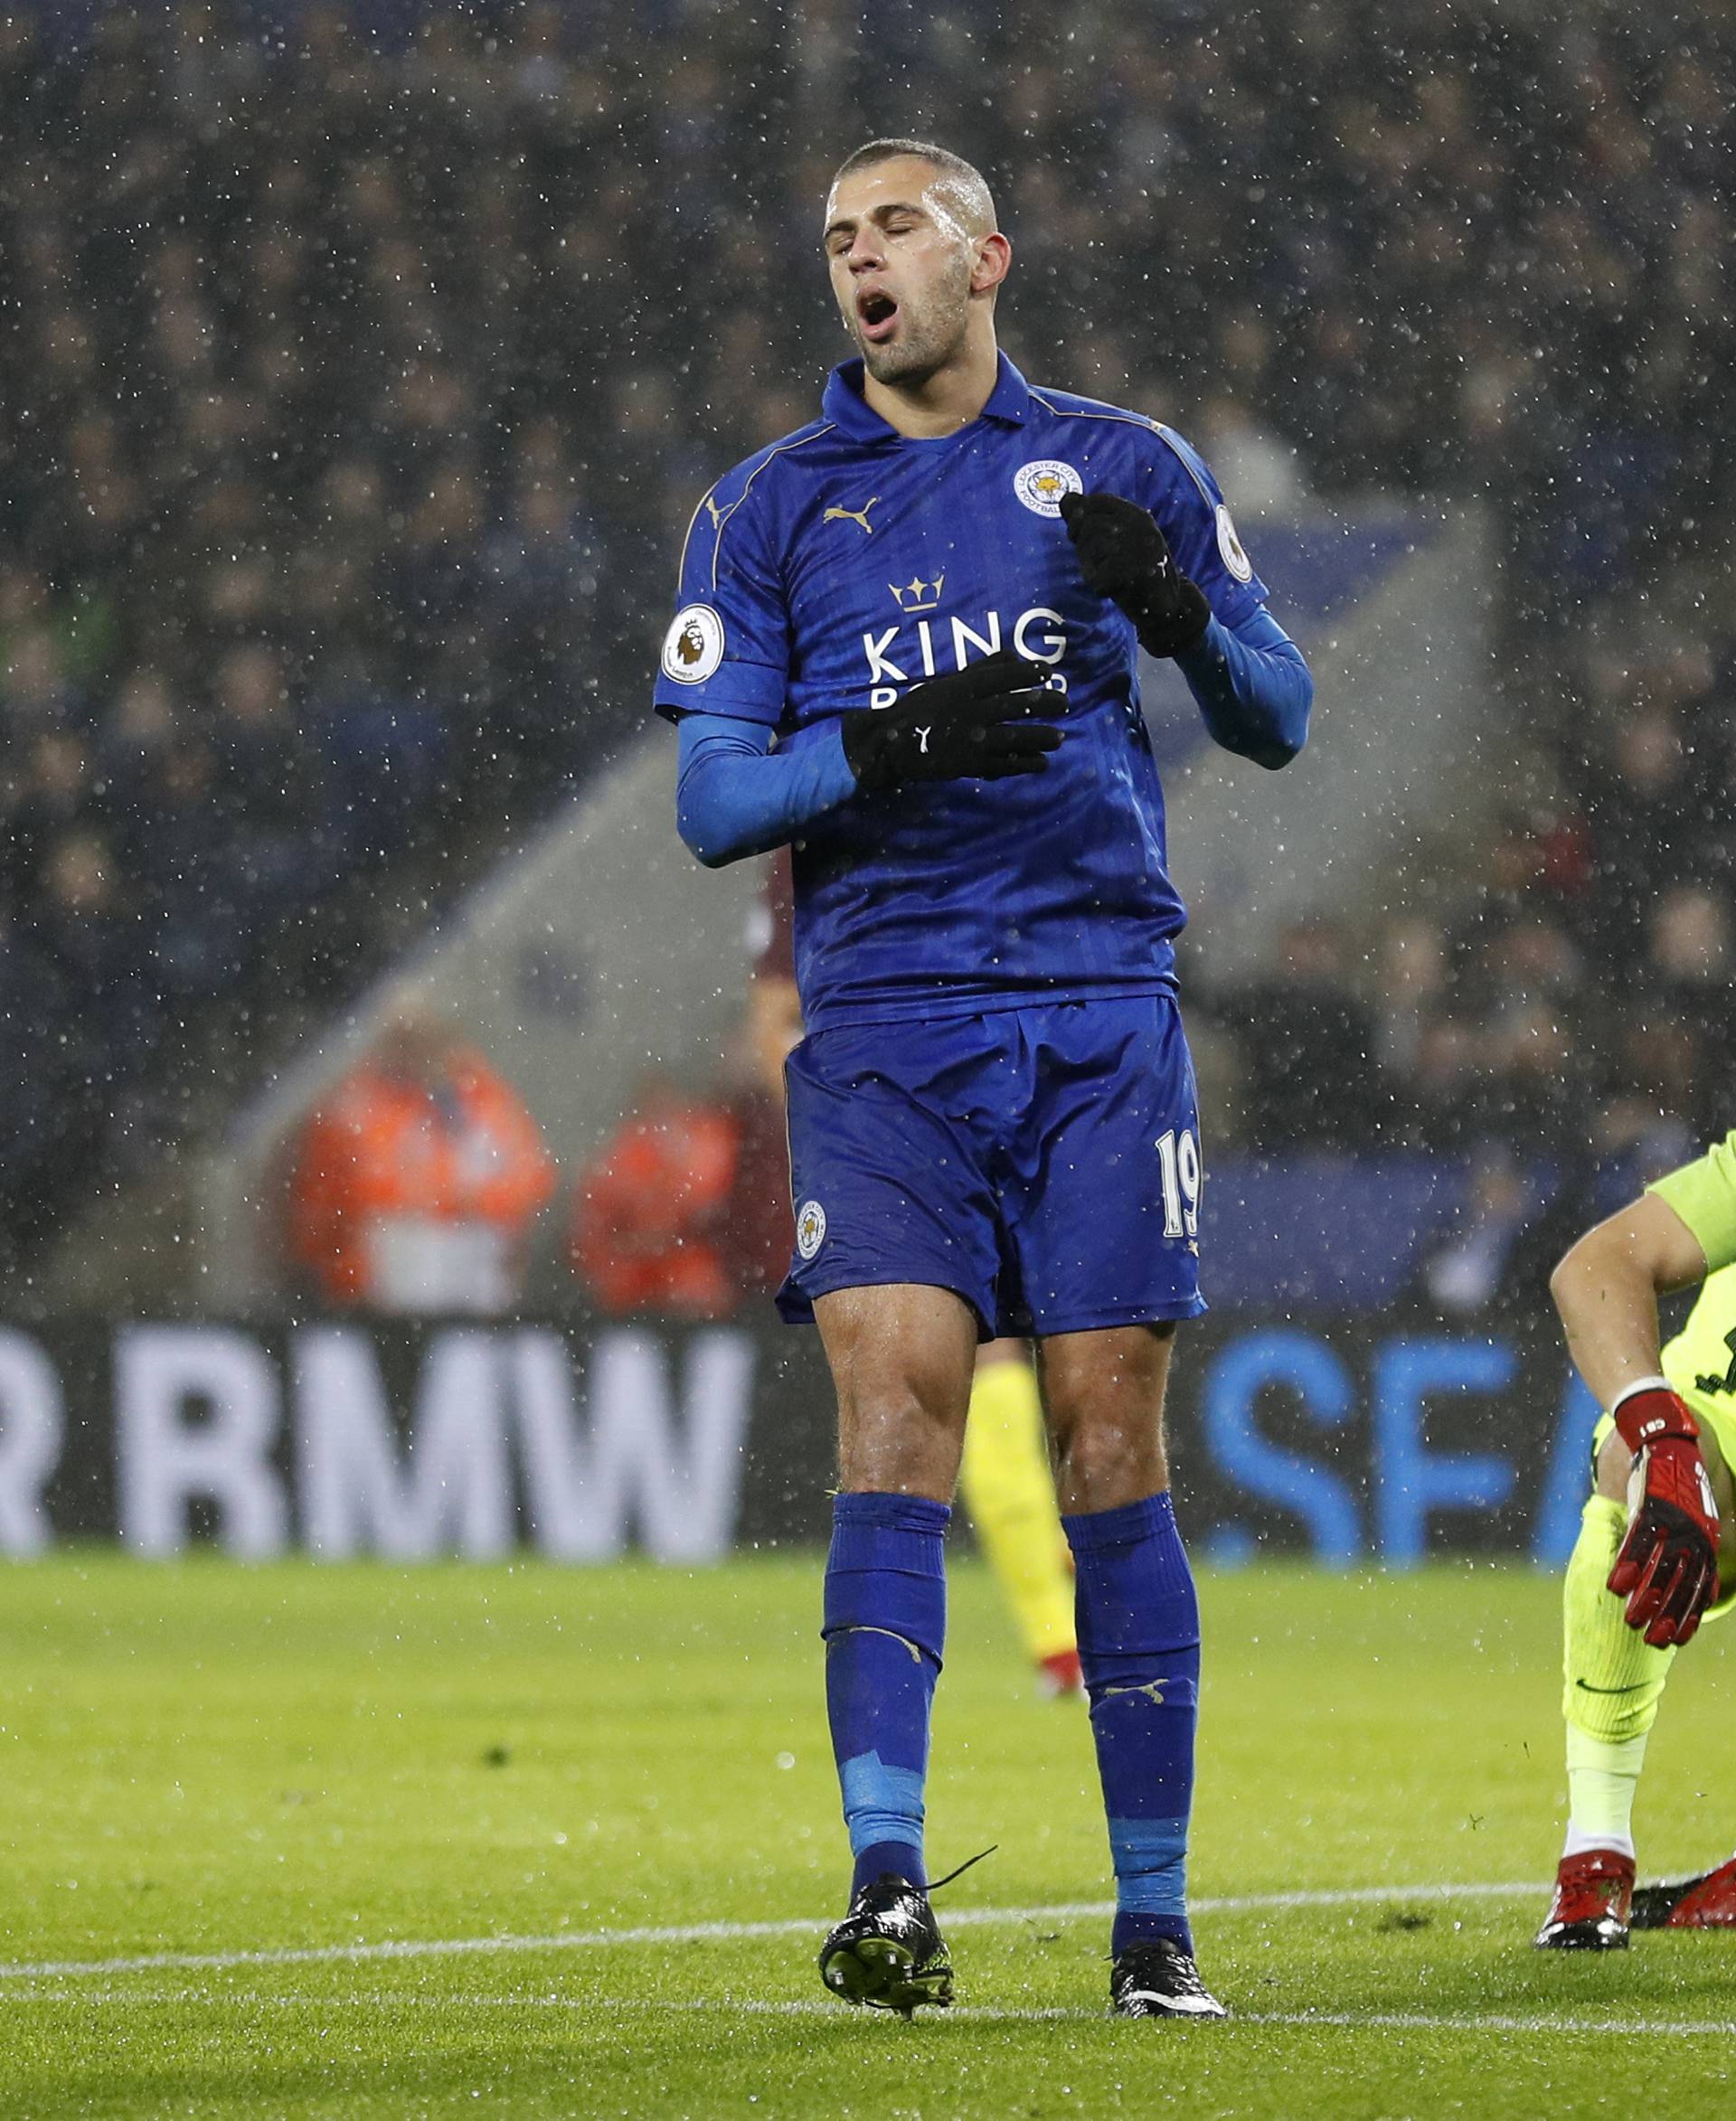 Leicester City's Islam Slimani looks dejected after missing a chance